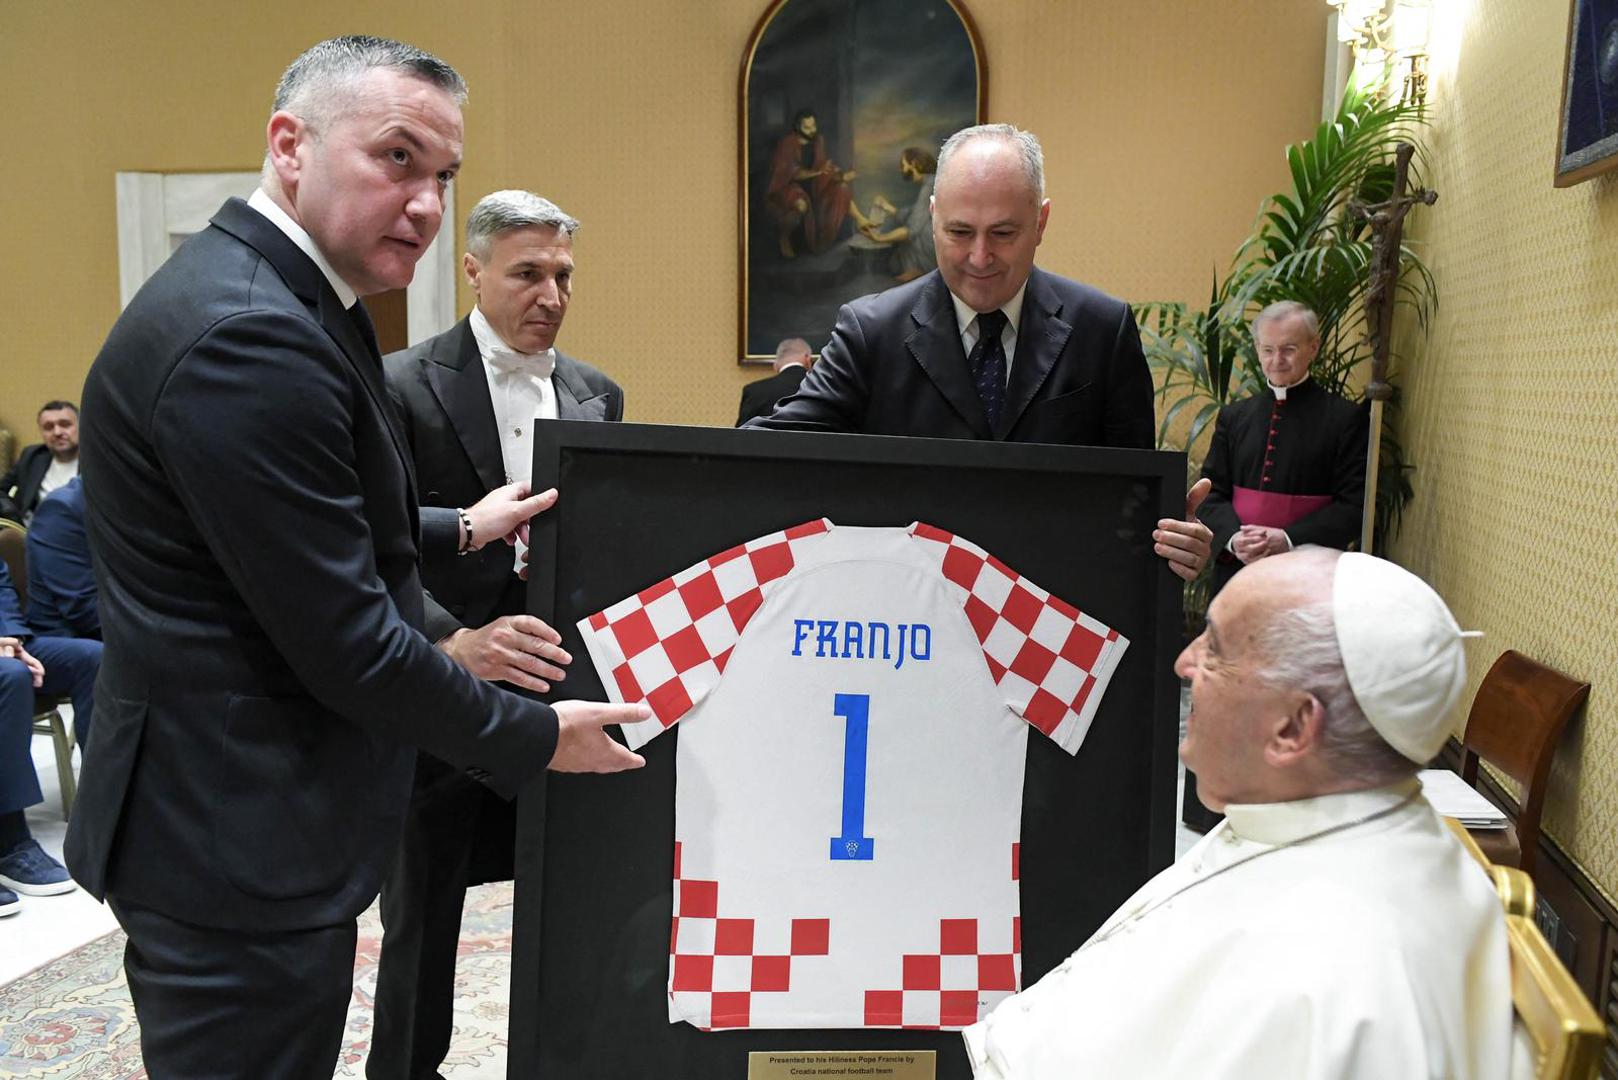 The president of Croatian Football Federation, Marijan Kustic, presents the Pope Francis with a symbolic gift, a Croatian national team jersey during a meeting of the pope with the players of the Croatian National Football Team at the Vatican on June 5, 2024. The Pope praised the Croatian team for their achievements, such as their third-place finish at the last World Cup in Qatar. The Croatians also received his blessing ahead of Euro 2024, which will soon be hosted by Germany. Photo: (EV) Vatican Media/ABACAPRESS.COM Photo: ABACA/ABACA